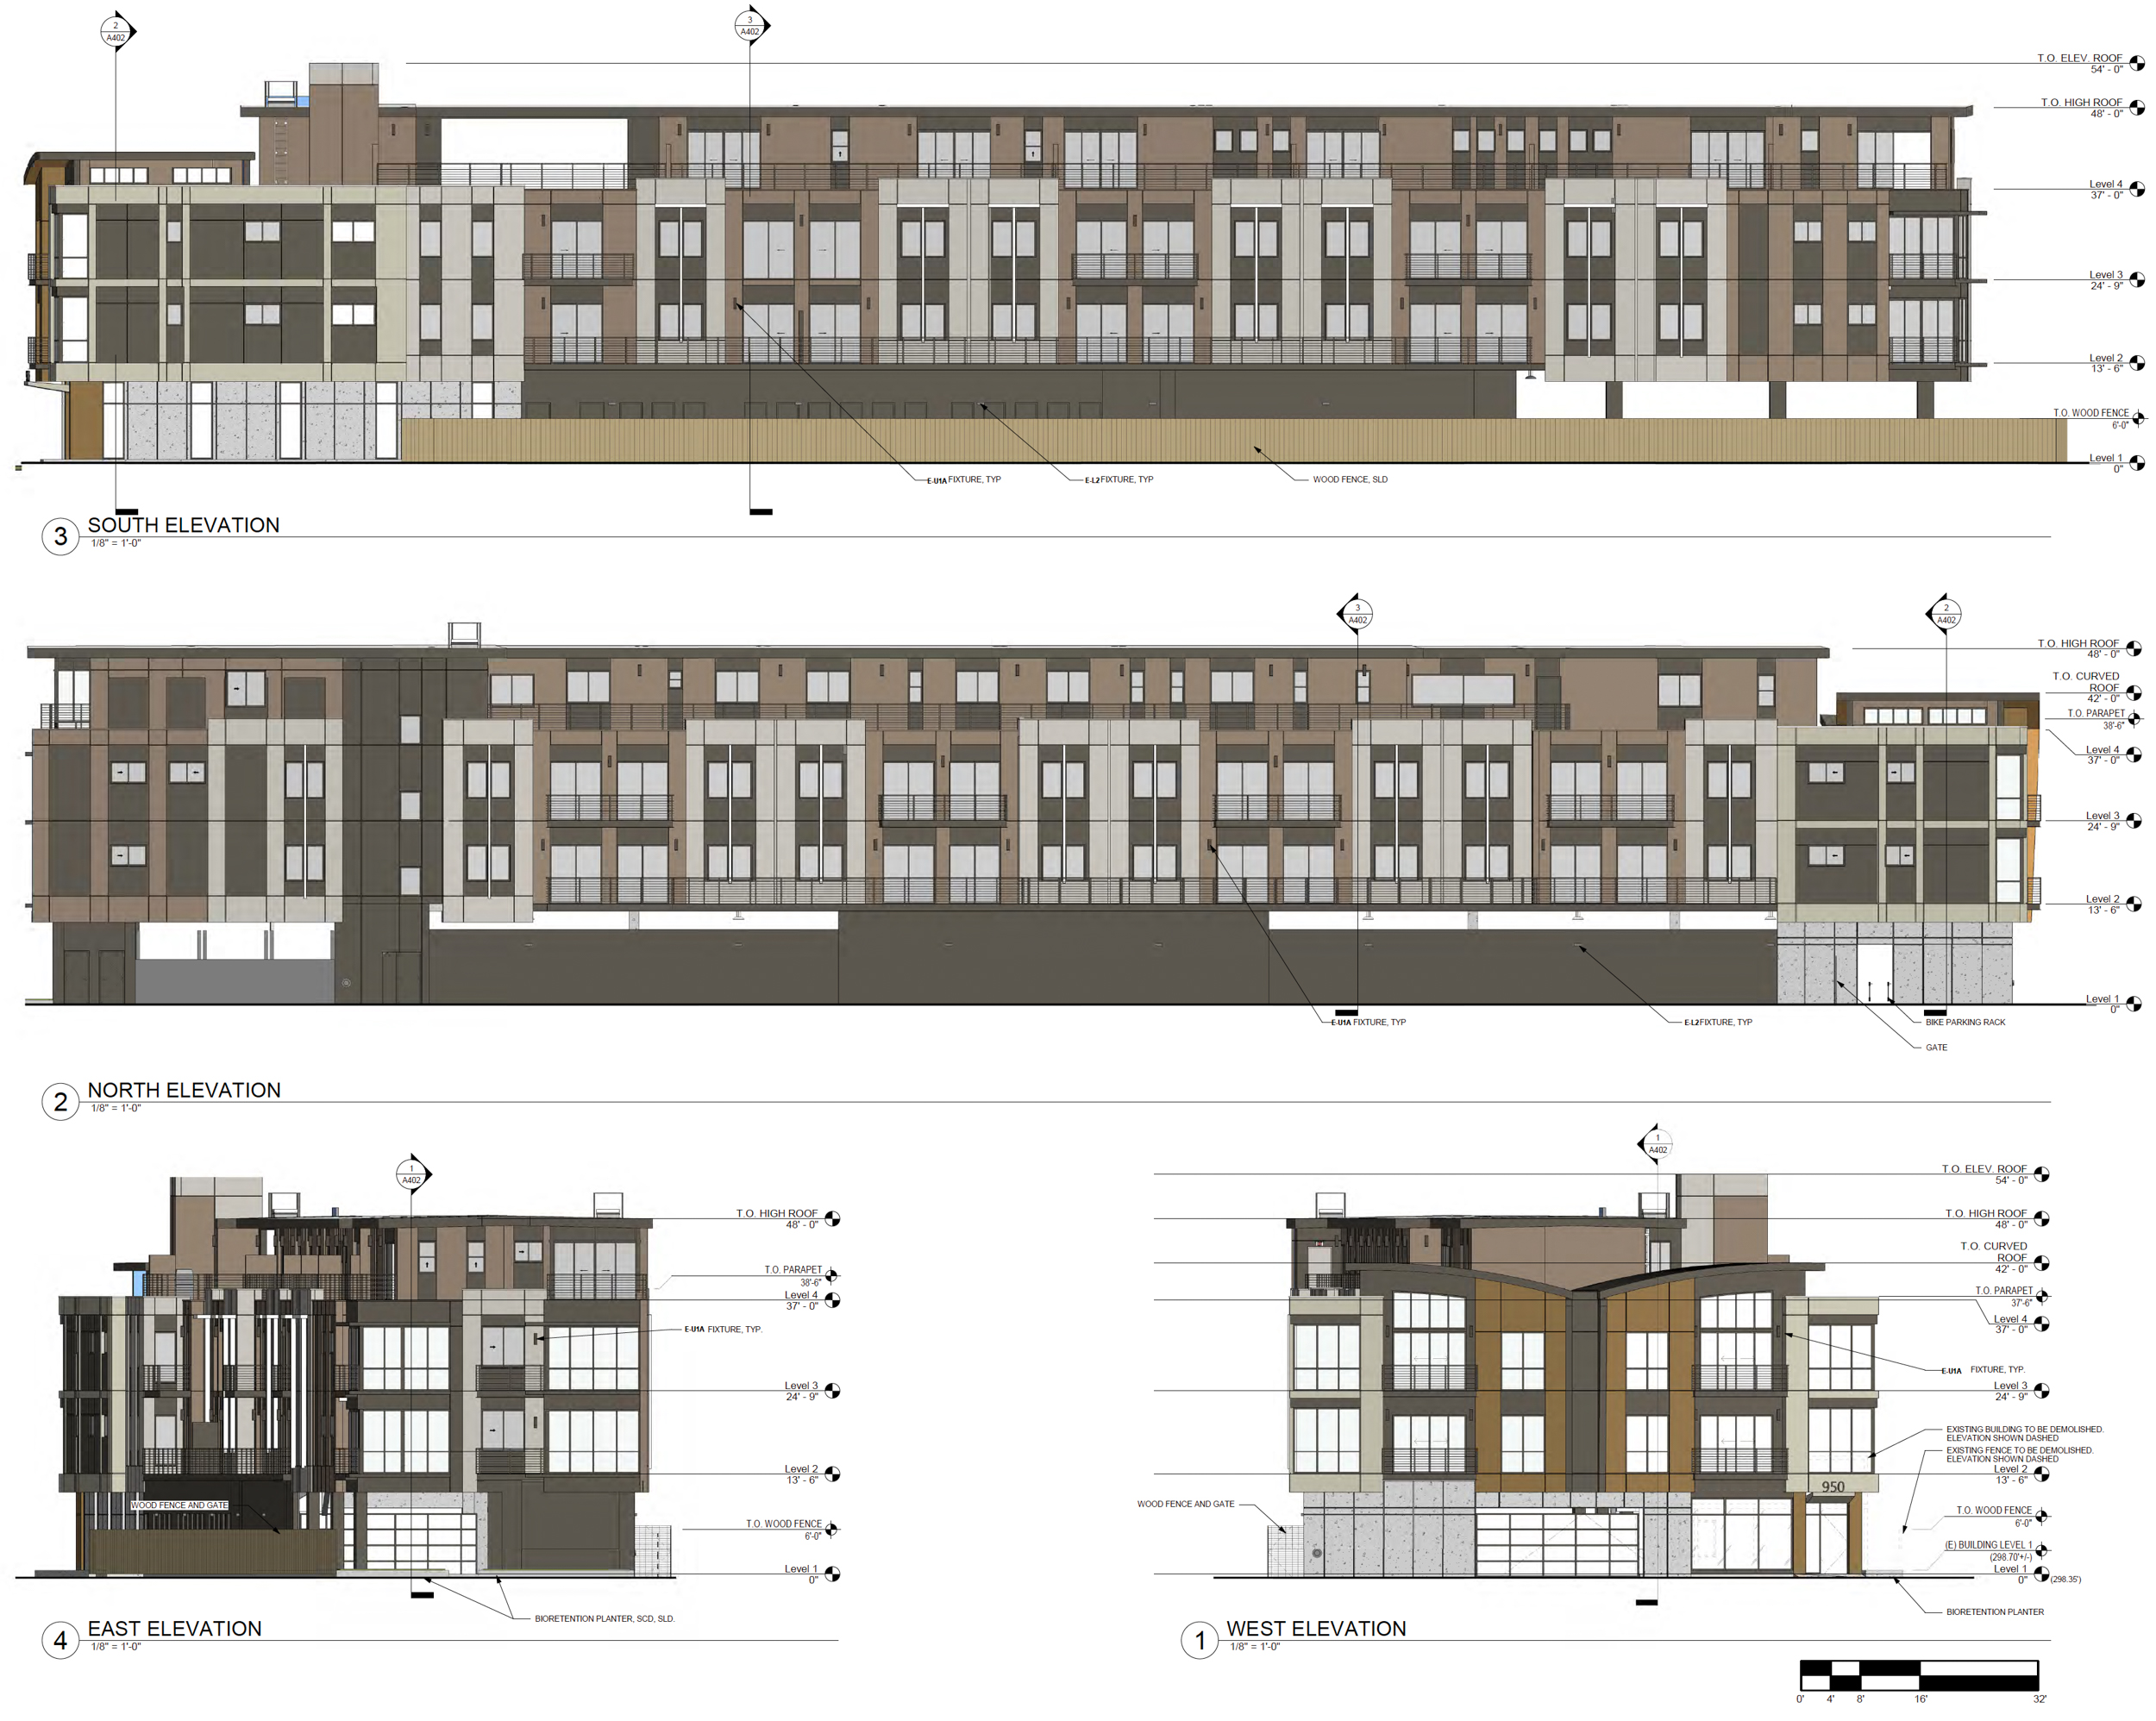 950 Hough Avenue facade elevations, illustration by Form4 Architecture